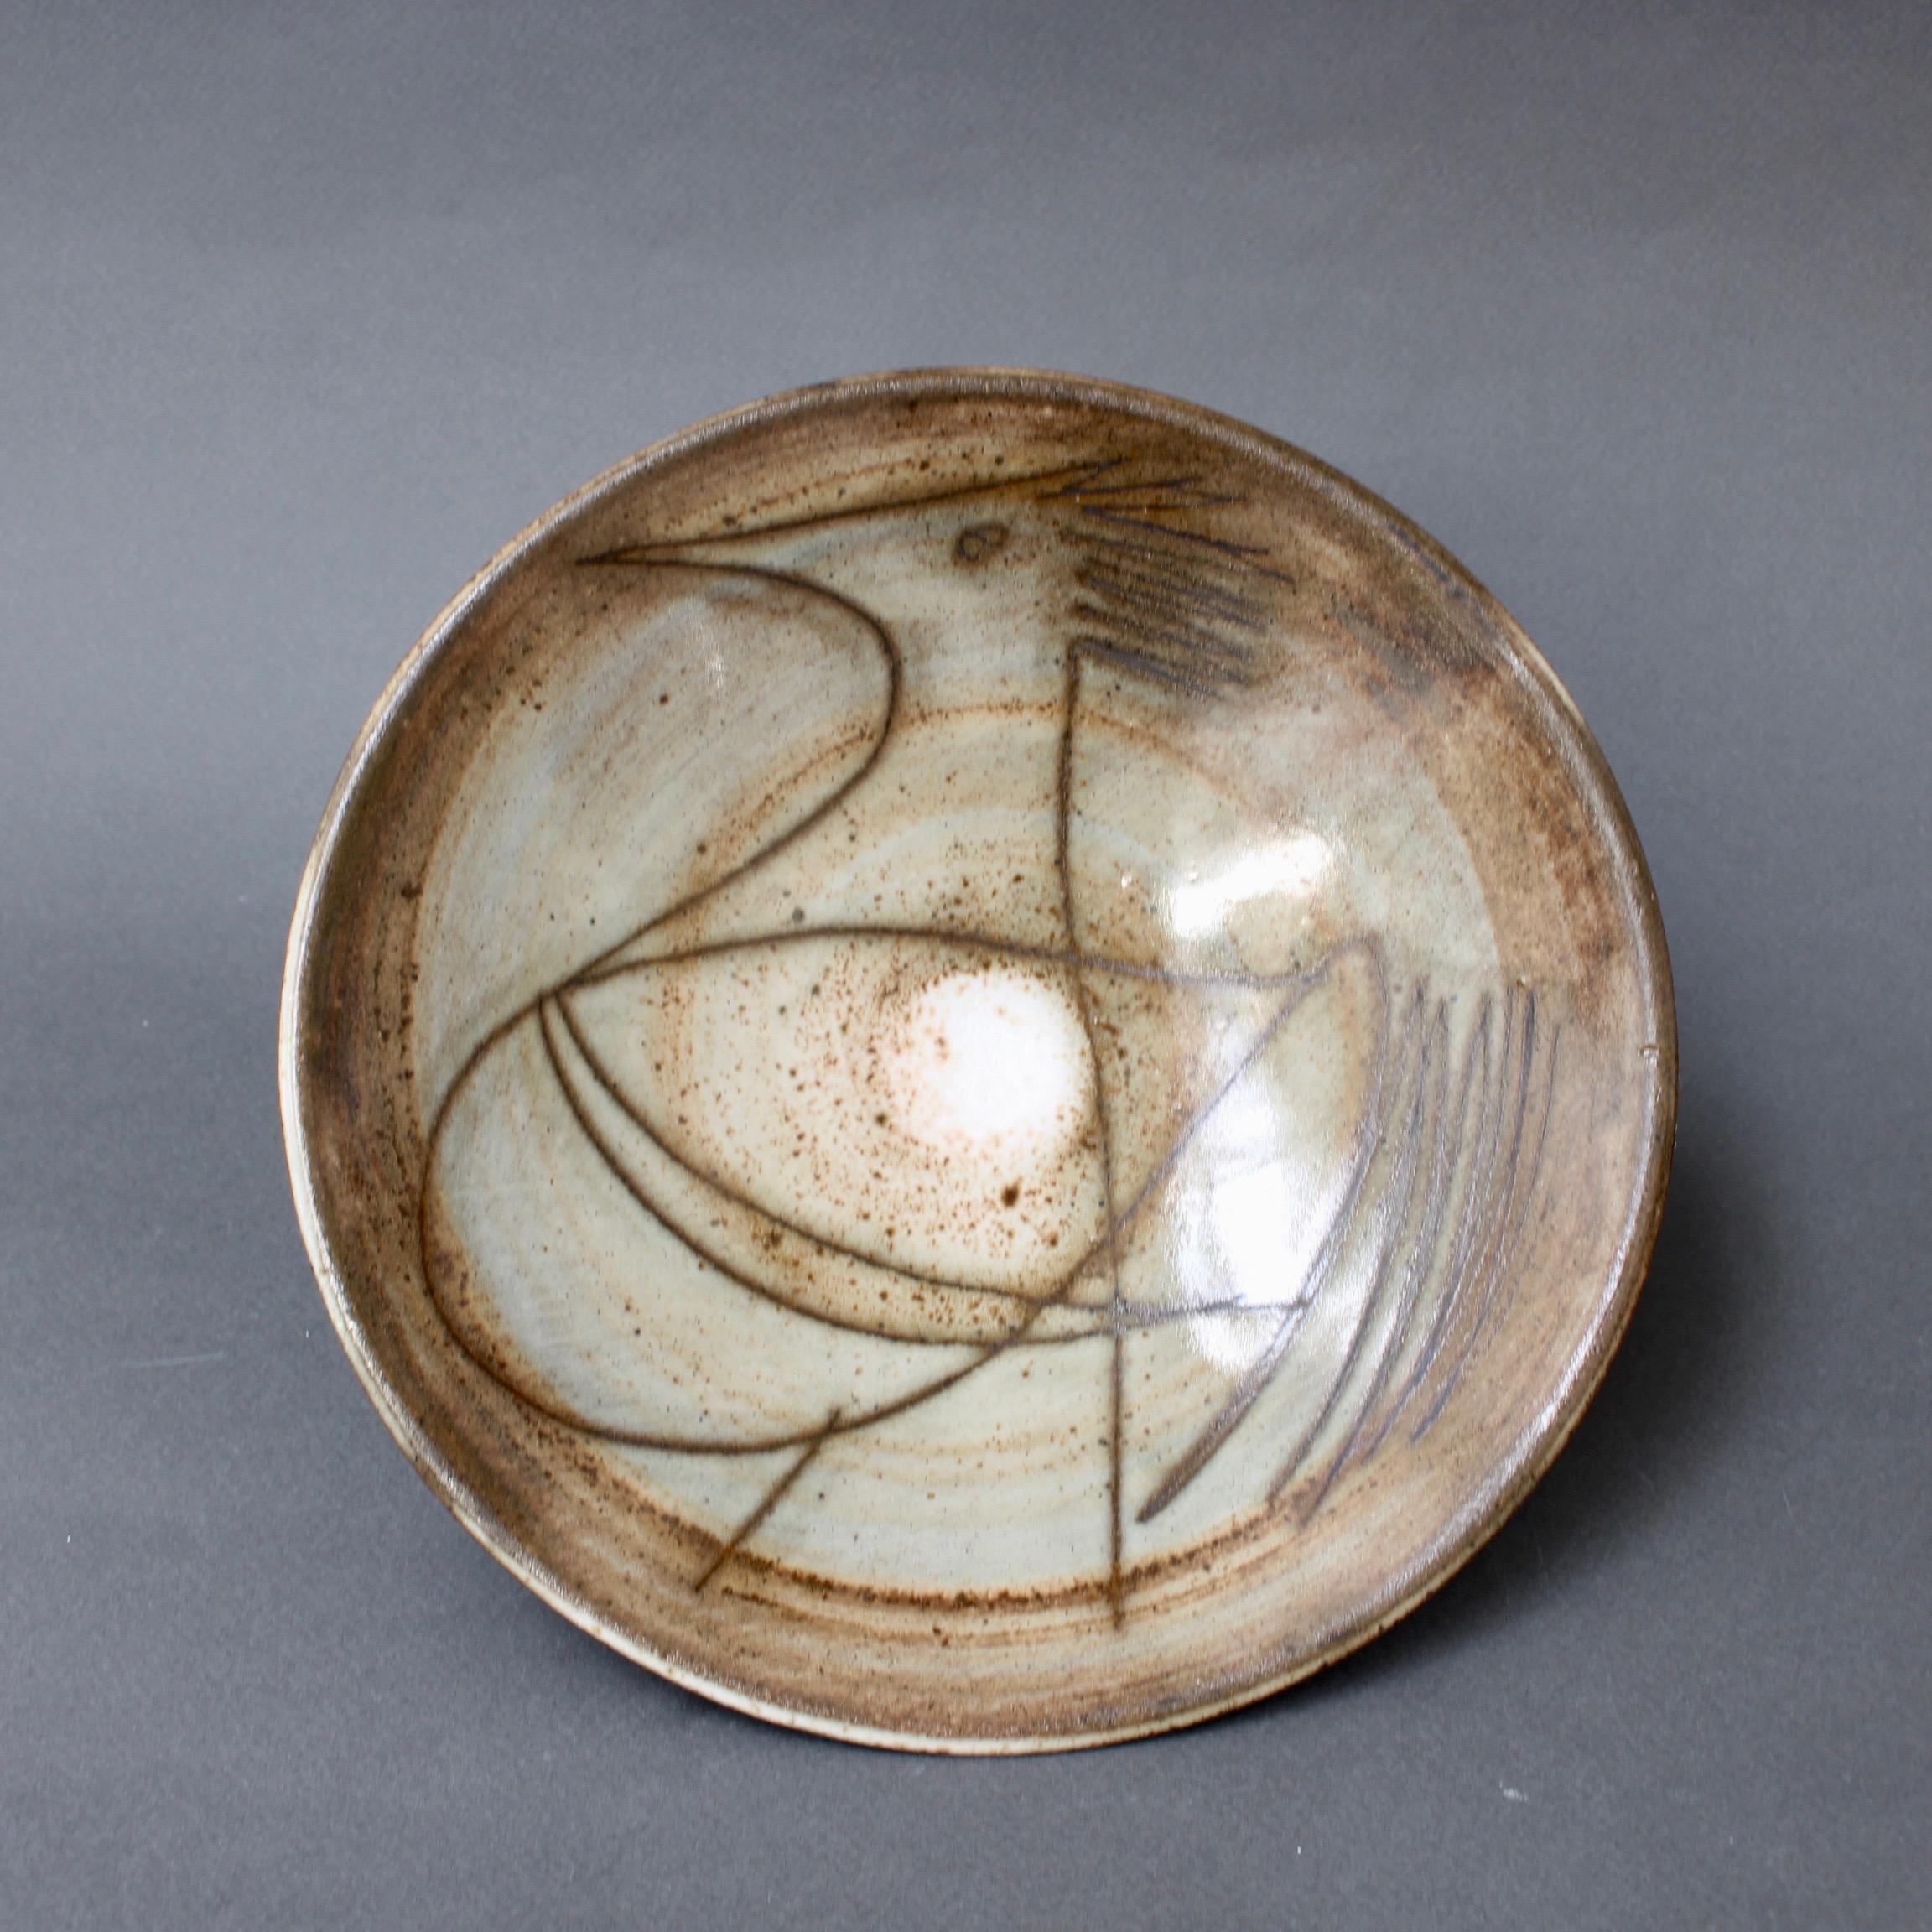 Midcentury decorative dish (circa 1960s) by Jacques Pouchain - Atelier Dieulefit. This elegant bowl, elevated by a small circular base, was created in Pouchain's trademark tones of brown. The bowl's glazed face is decorated with one of Pouchain's